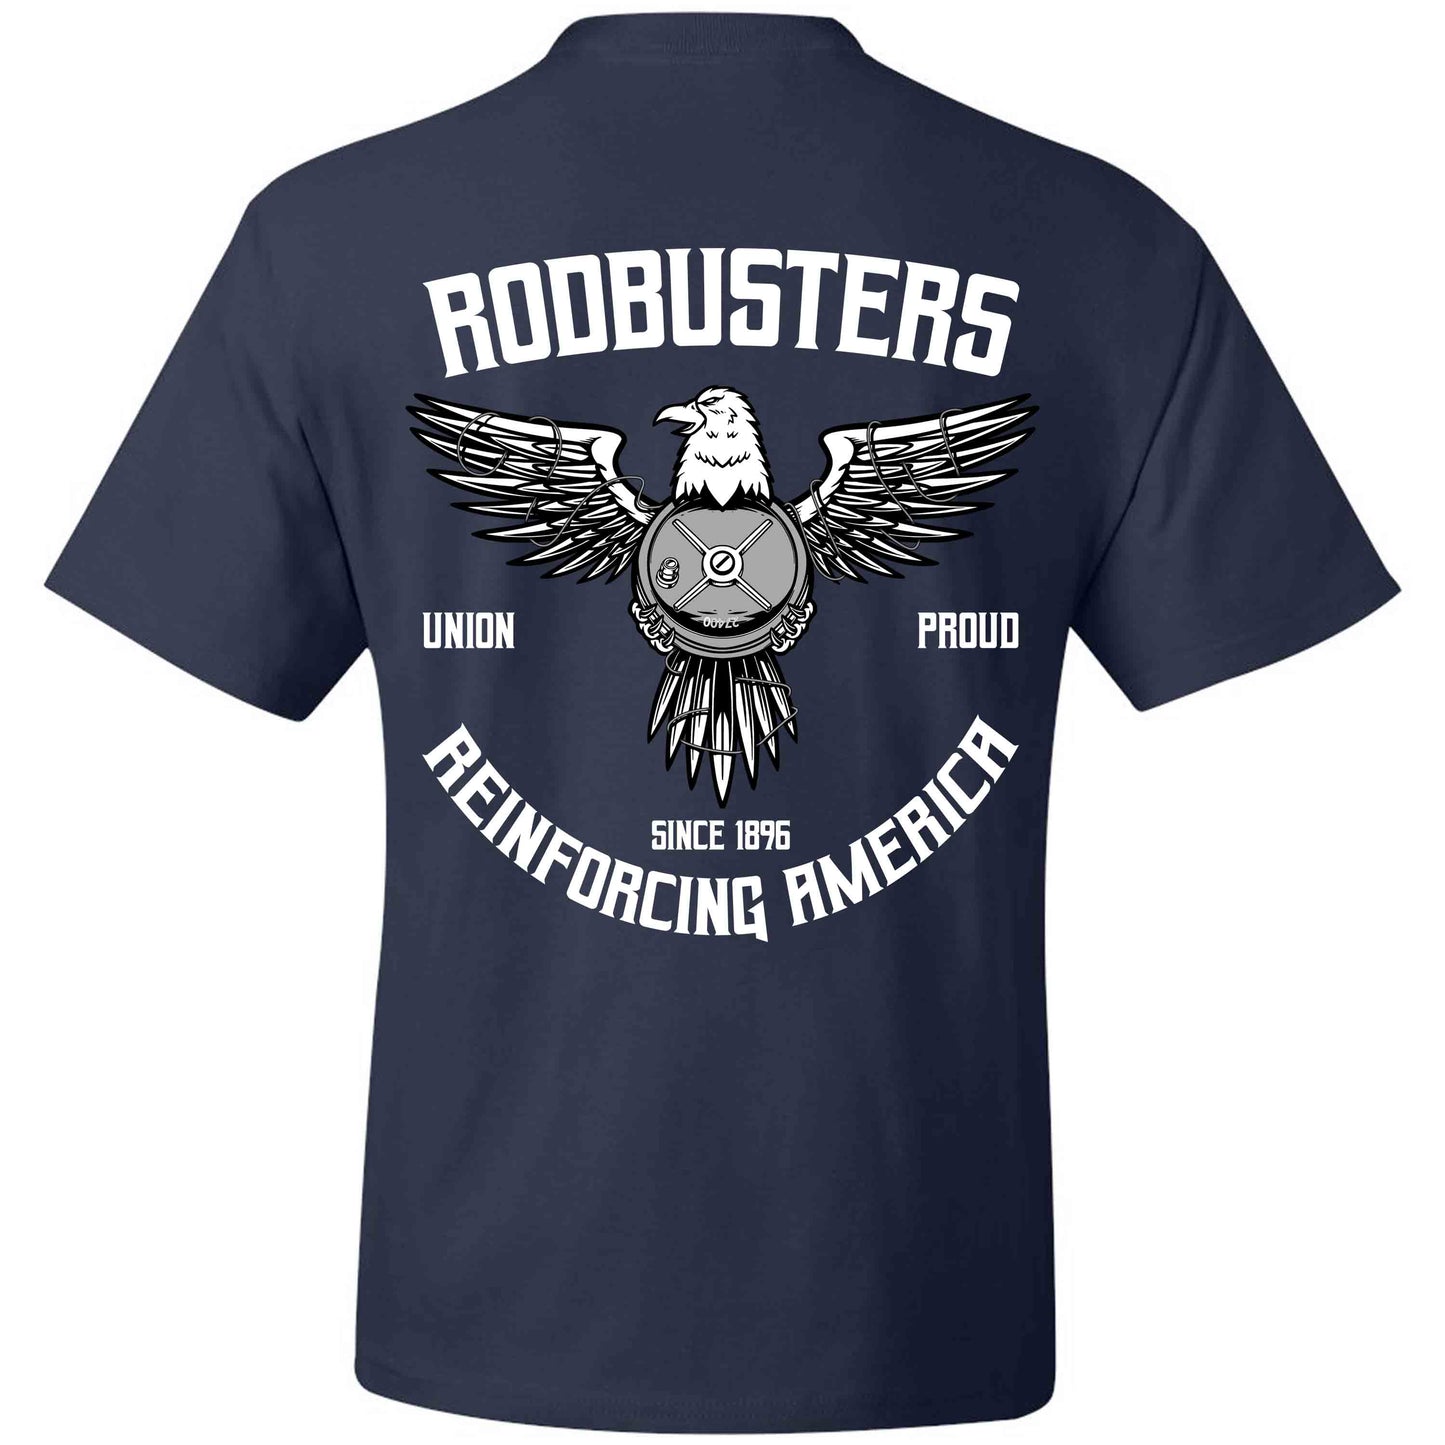 WIRE REEL EAGLE T-SHIRT